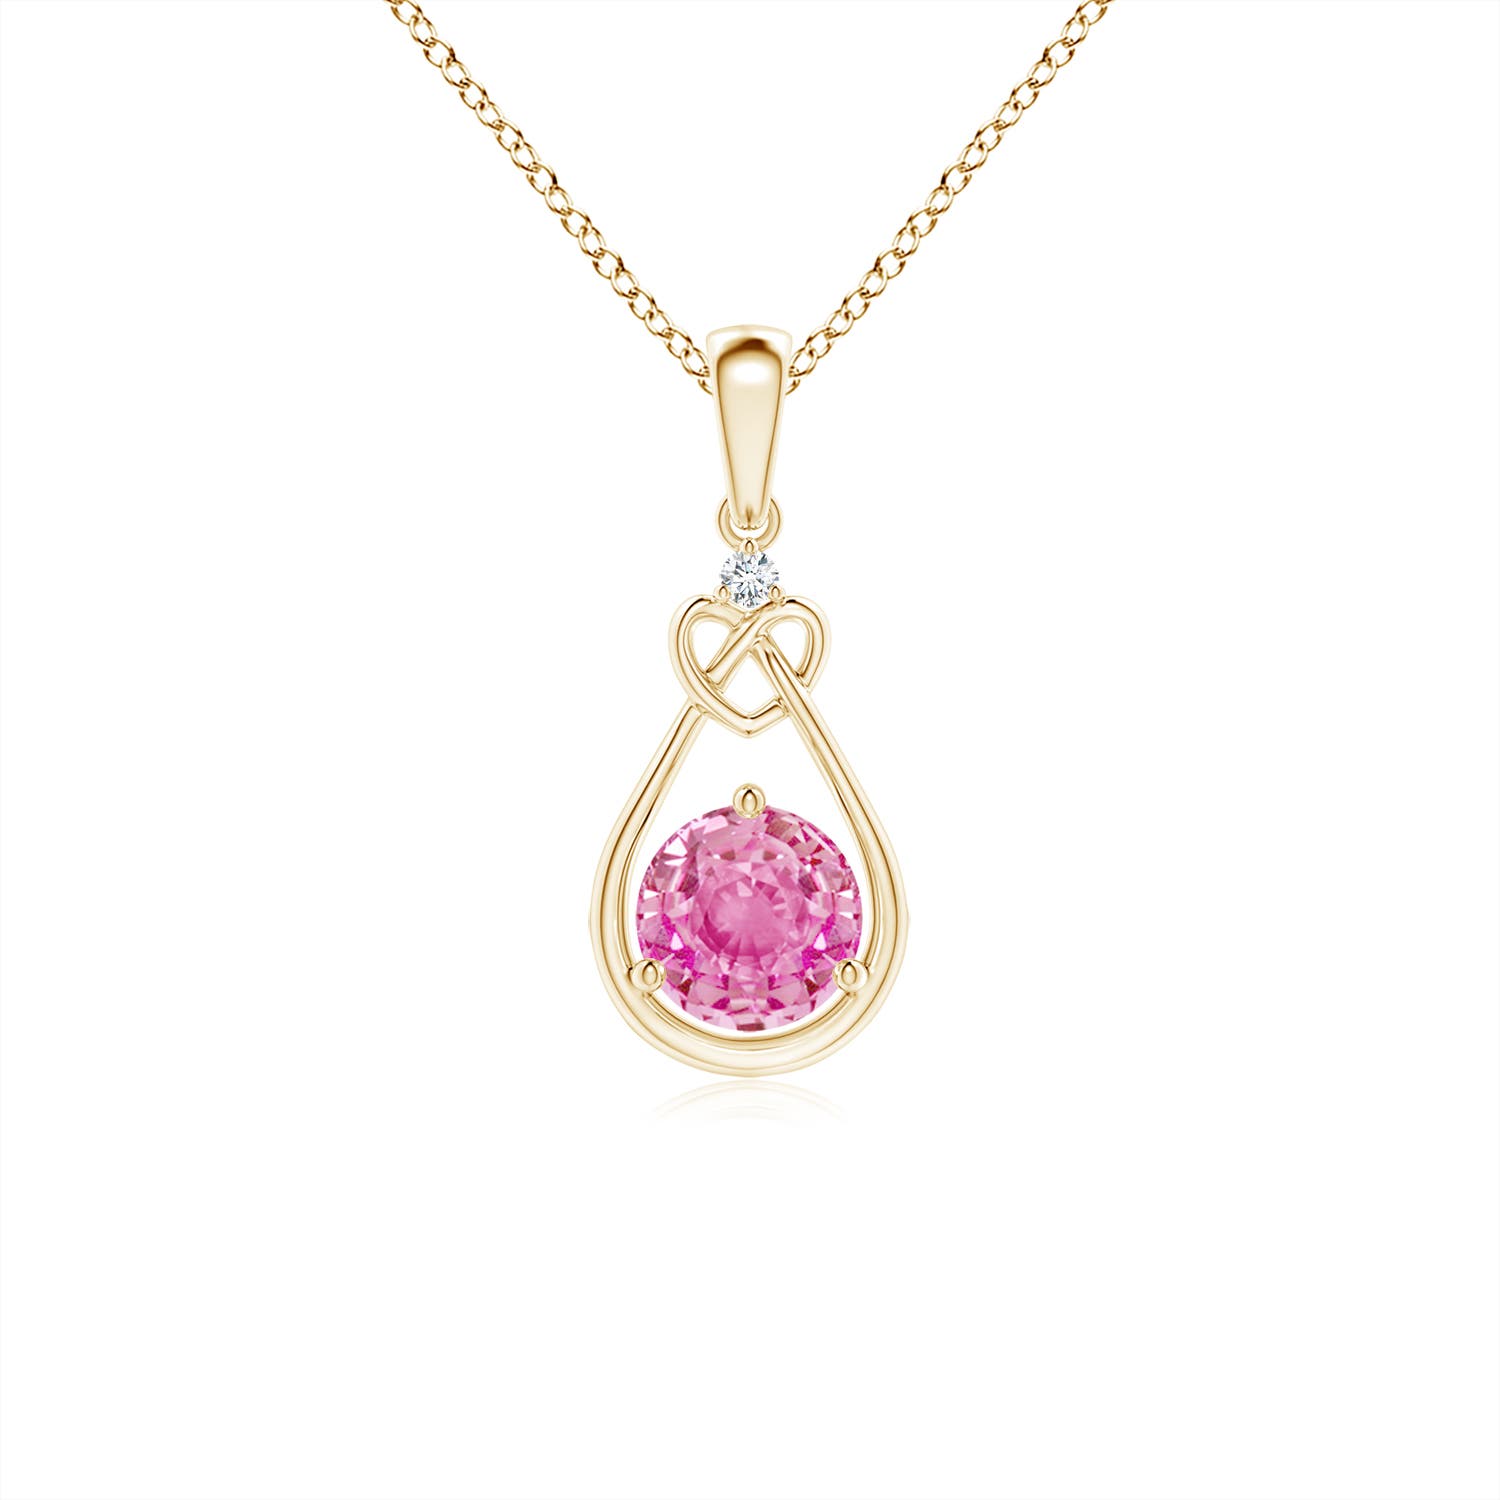 AA - Pink Sapphire / 0.61 CT / 14 KT Yellow Gold